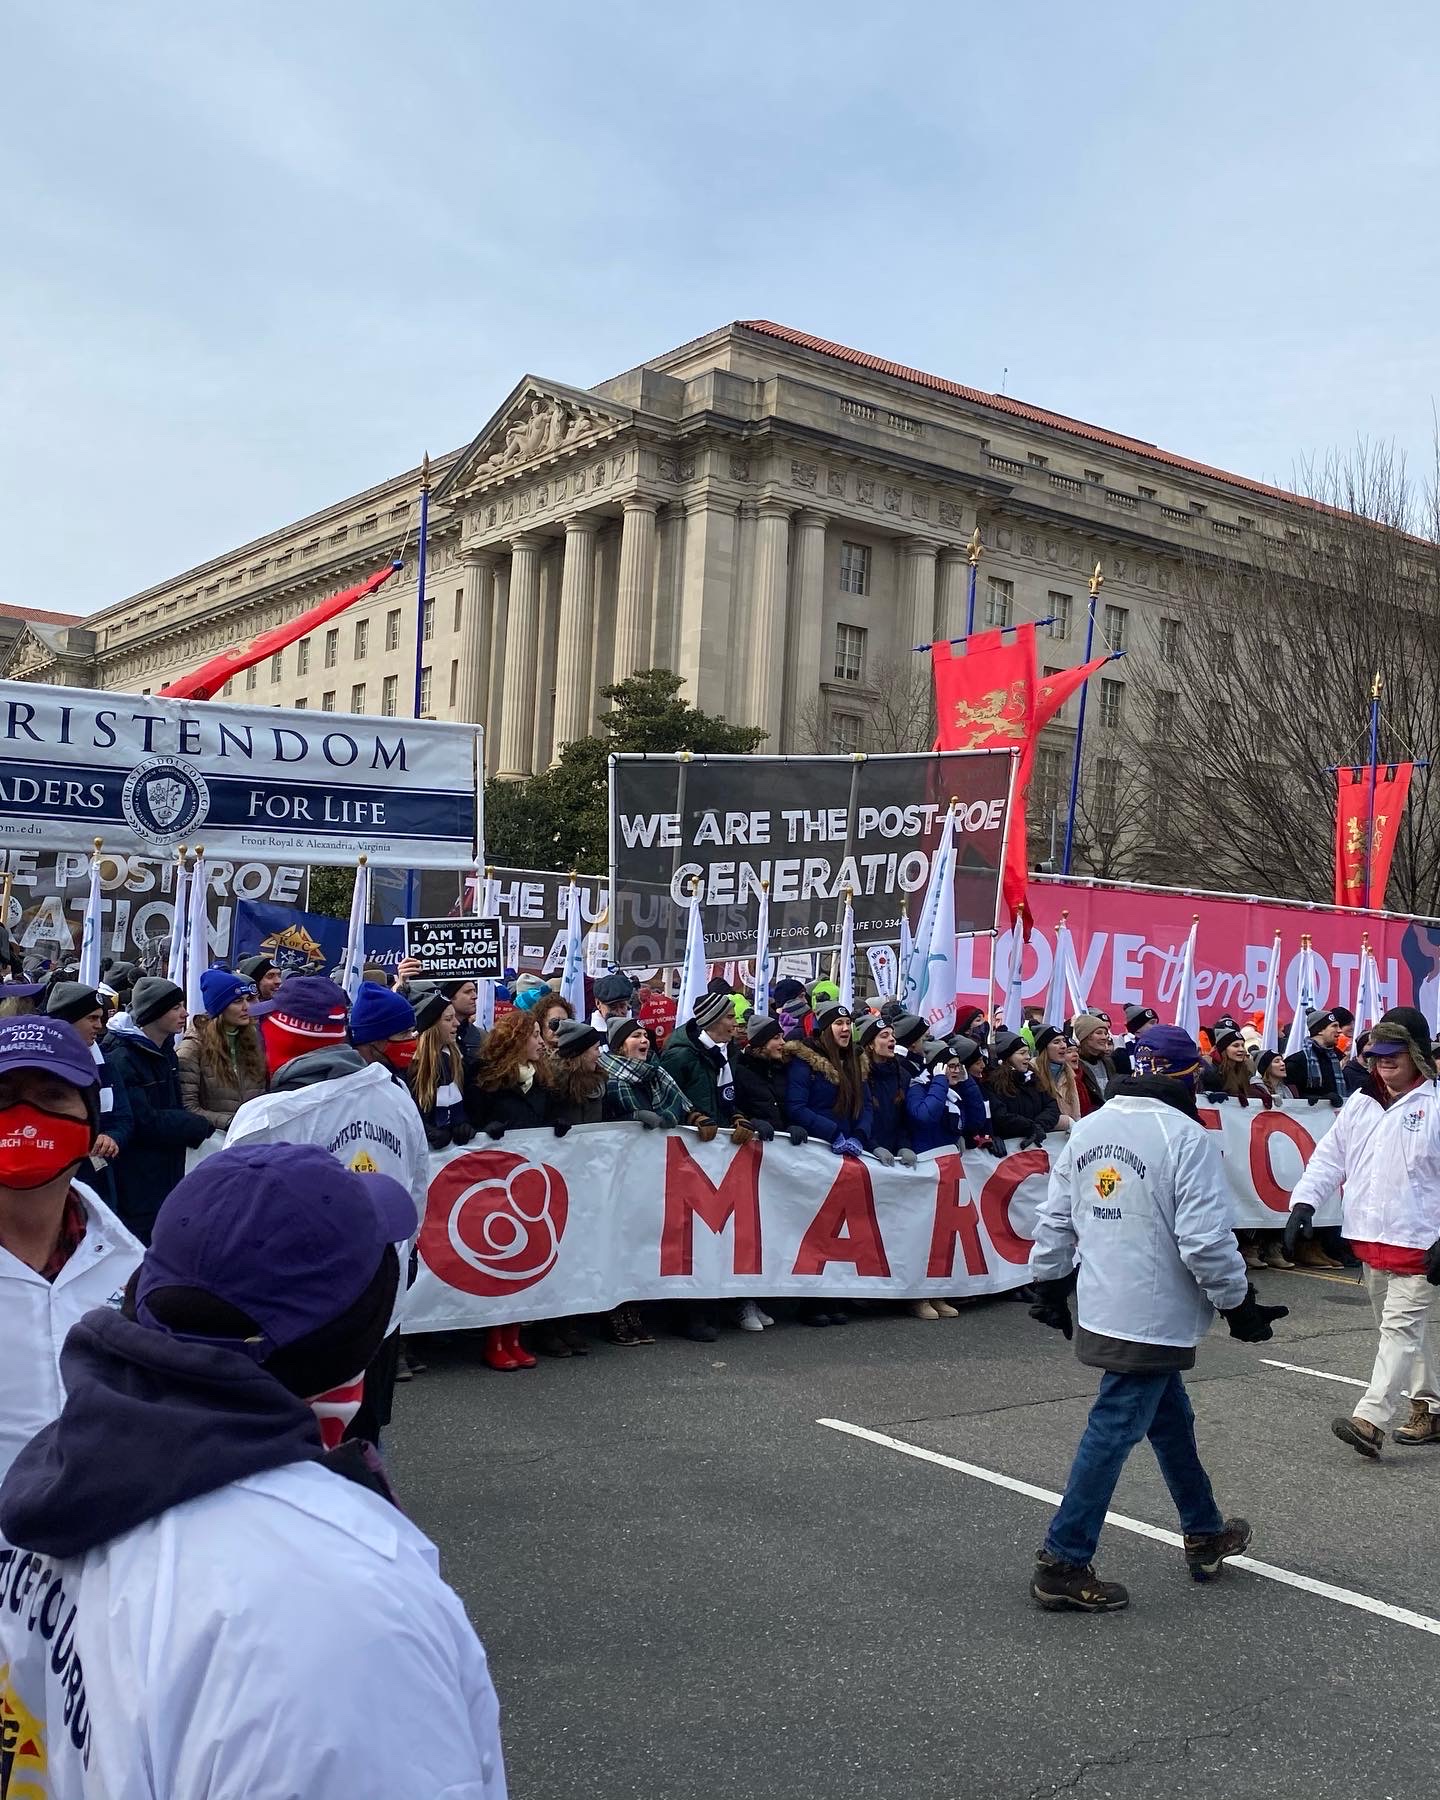 Marching for Life in D.C.